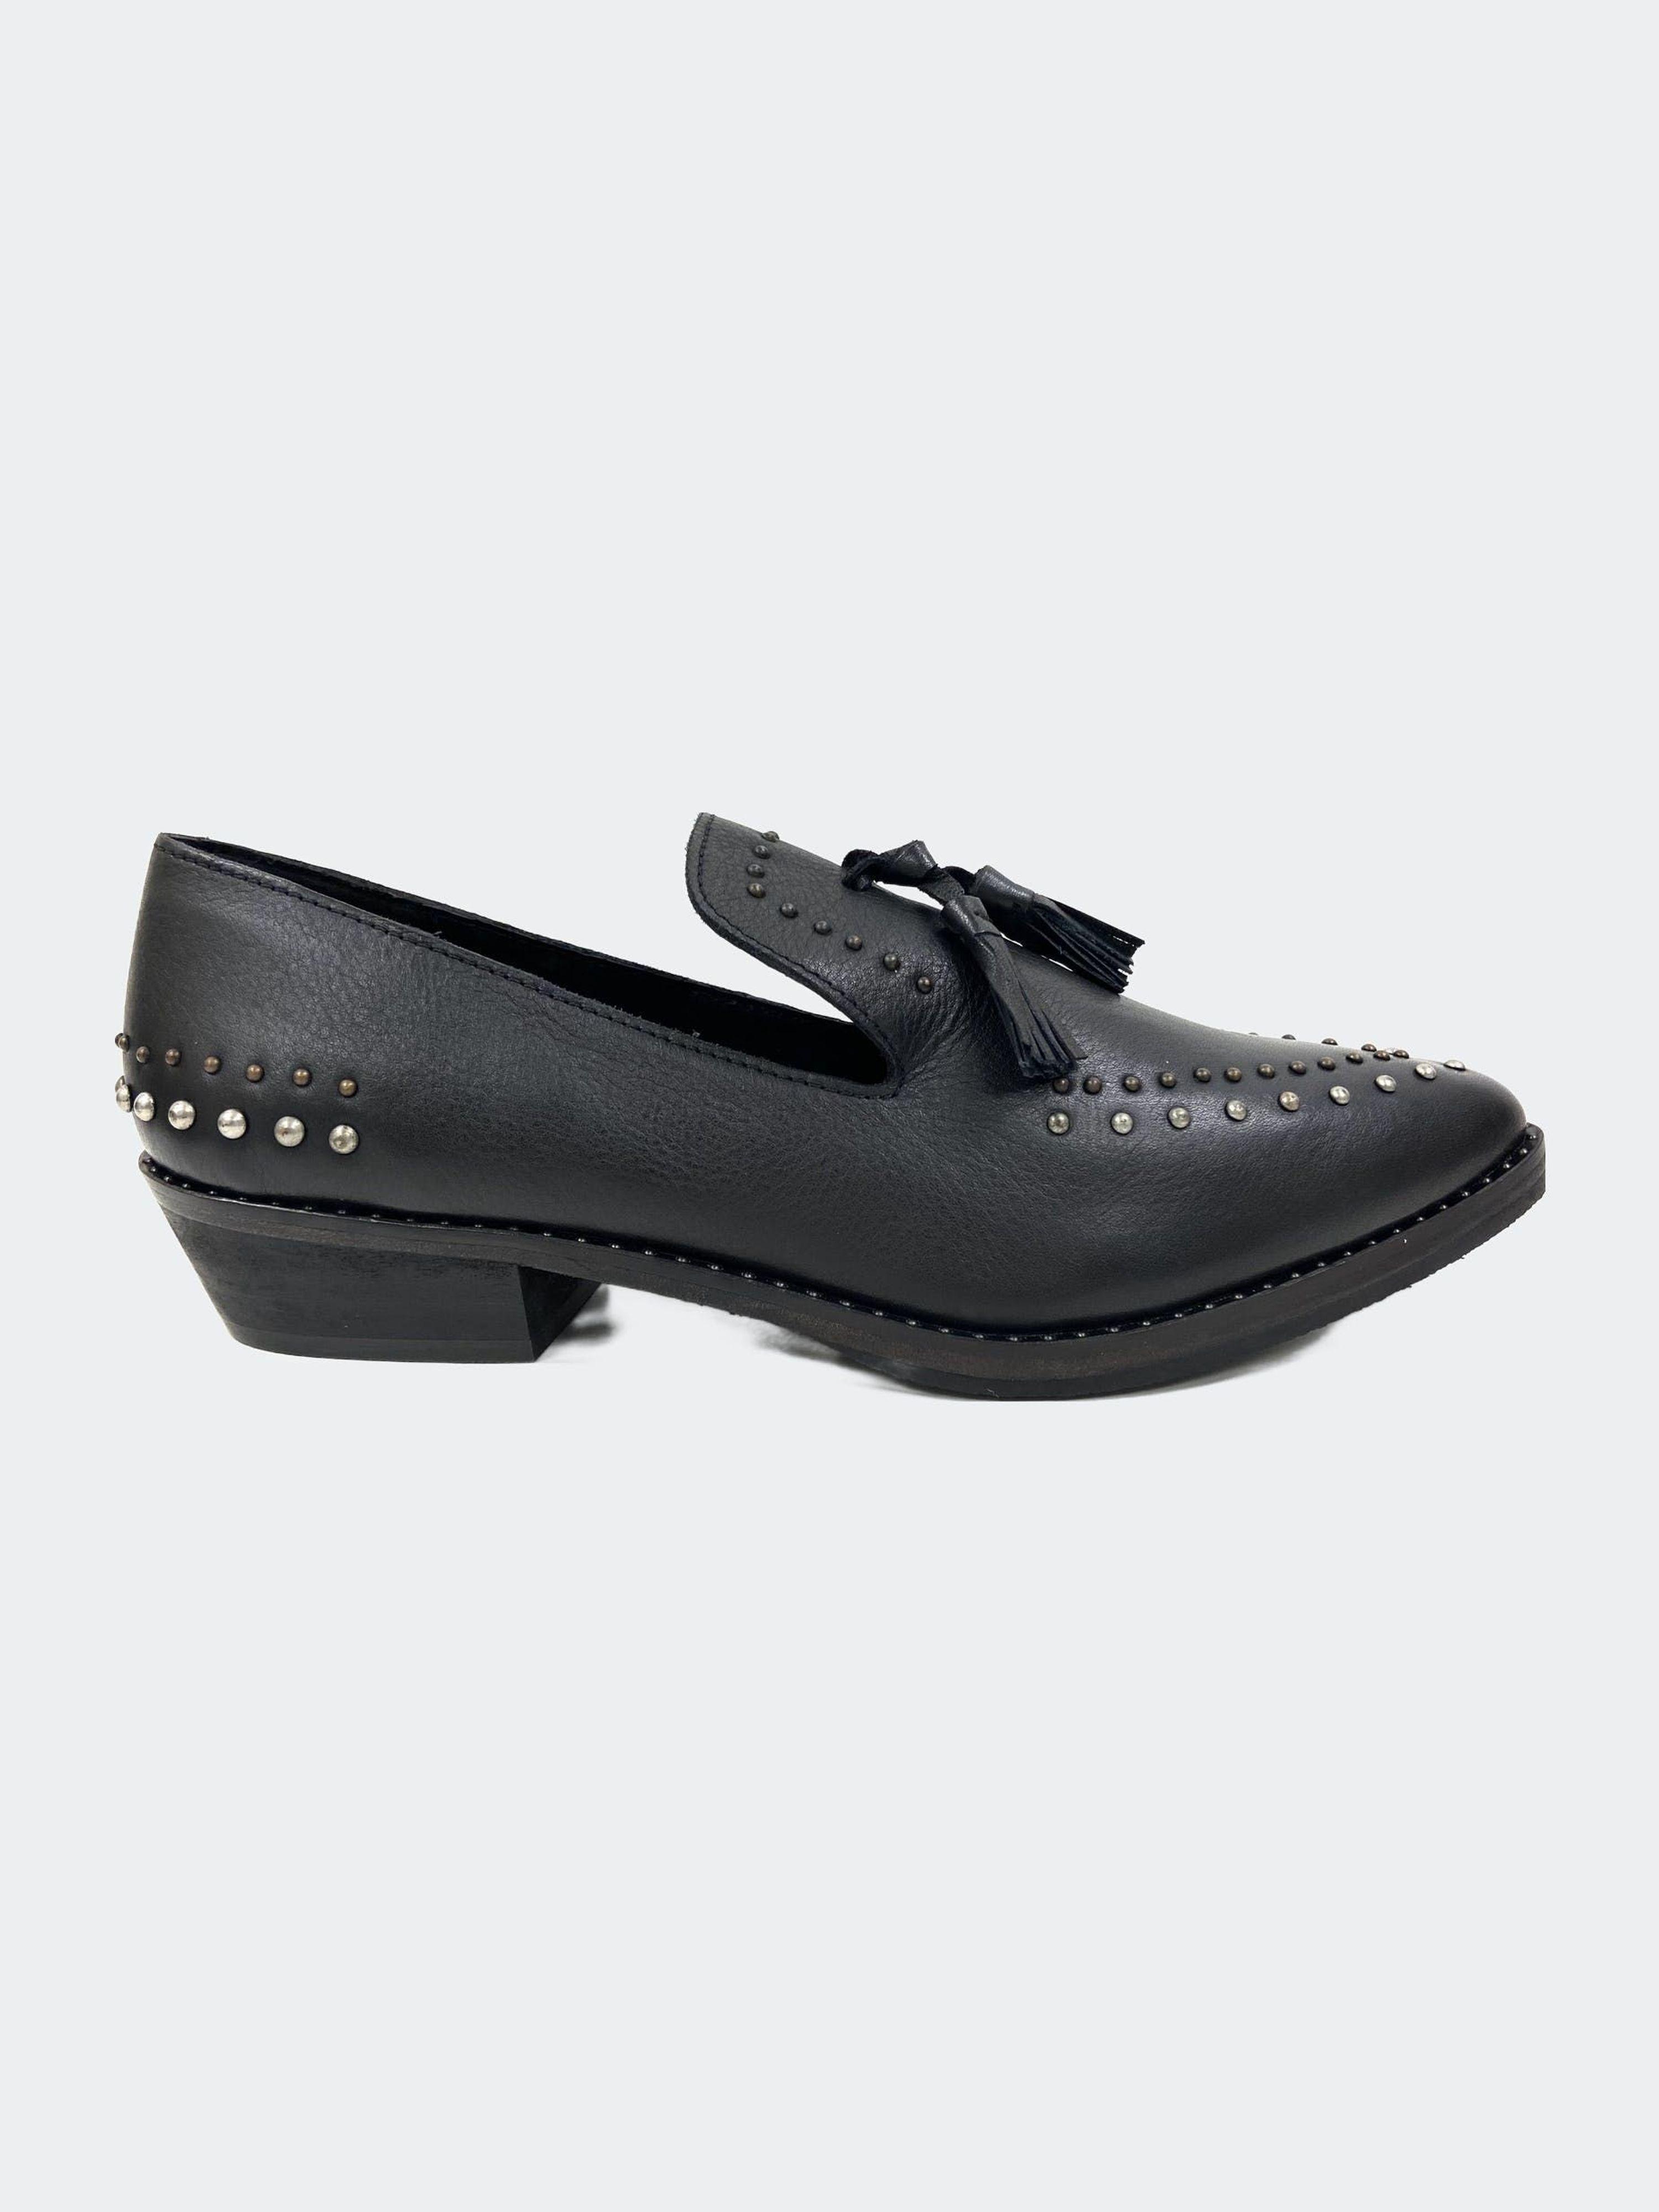 oobash Stacked Mid Heel Studded Loafers in Black | Lyst